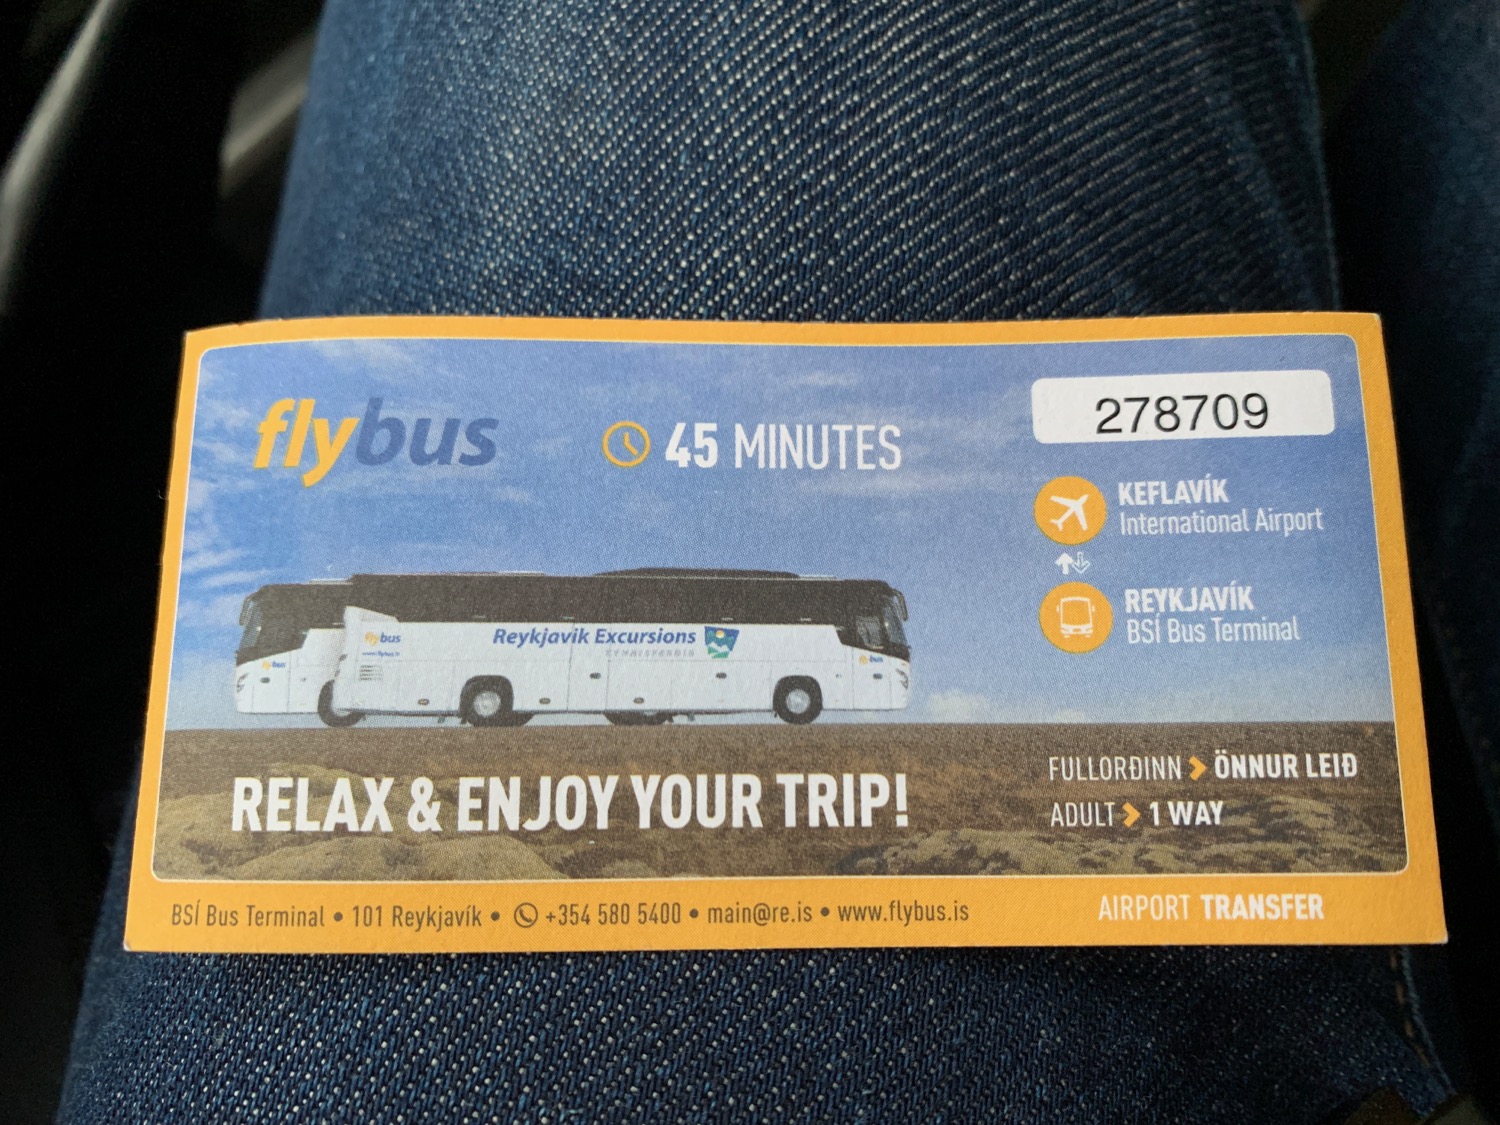 a bus ticket on a person's leg